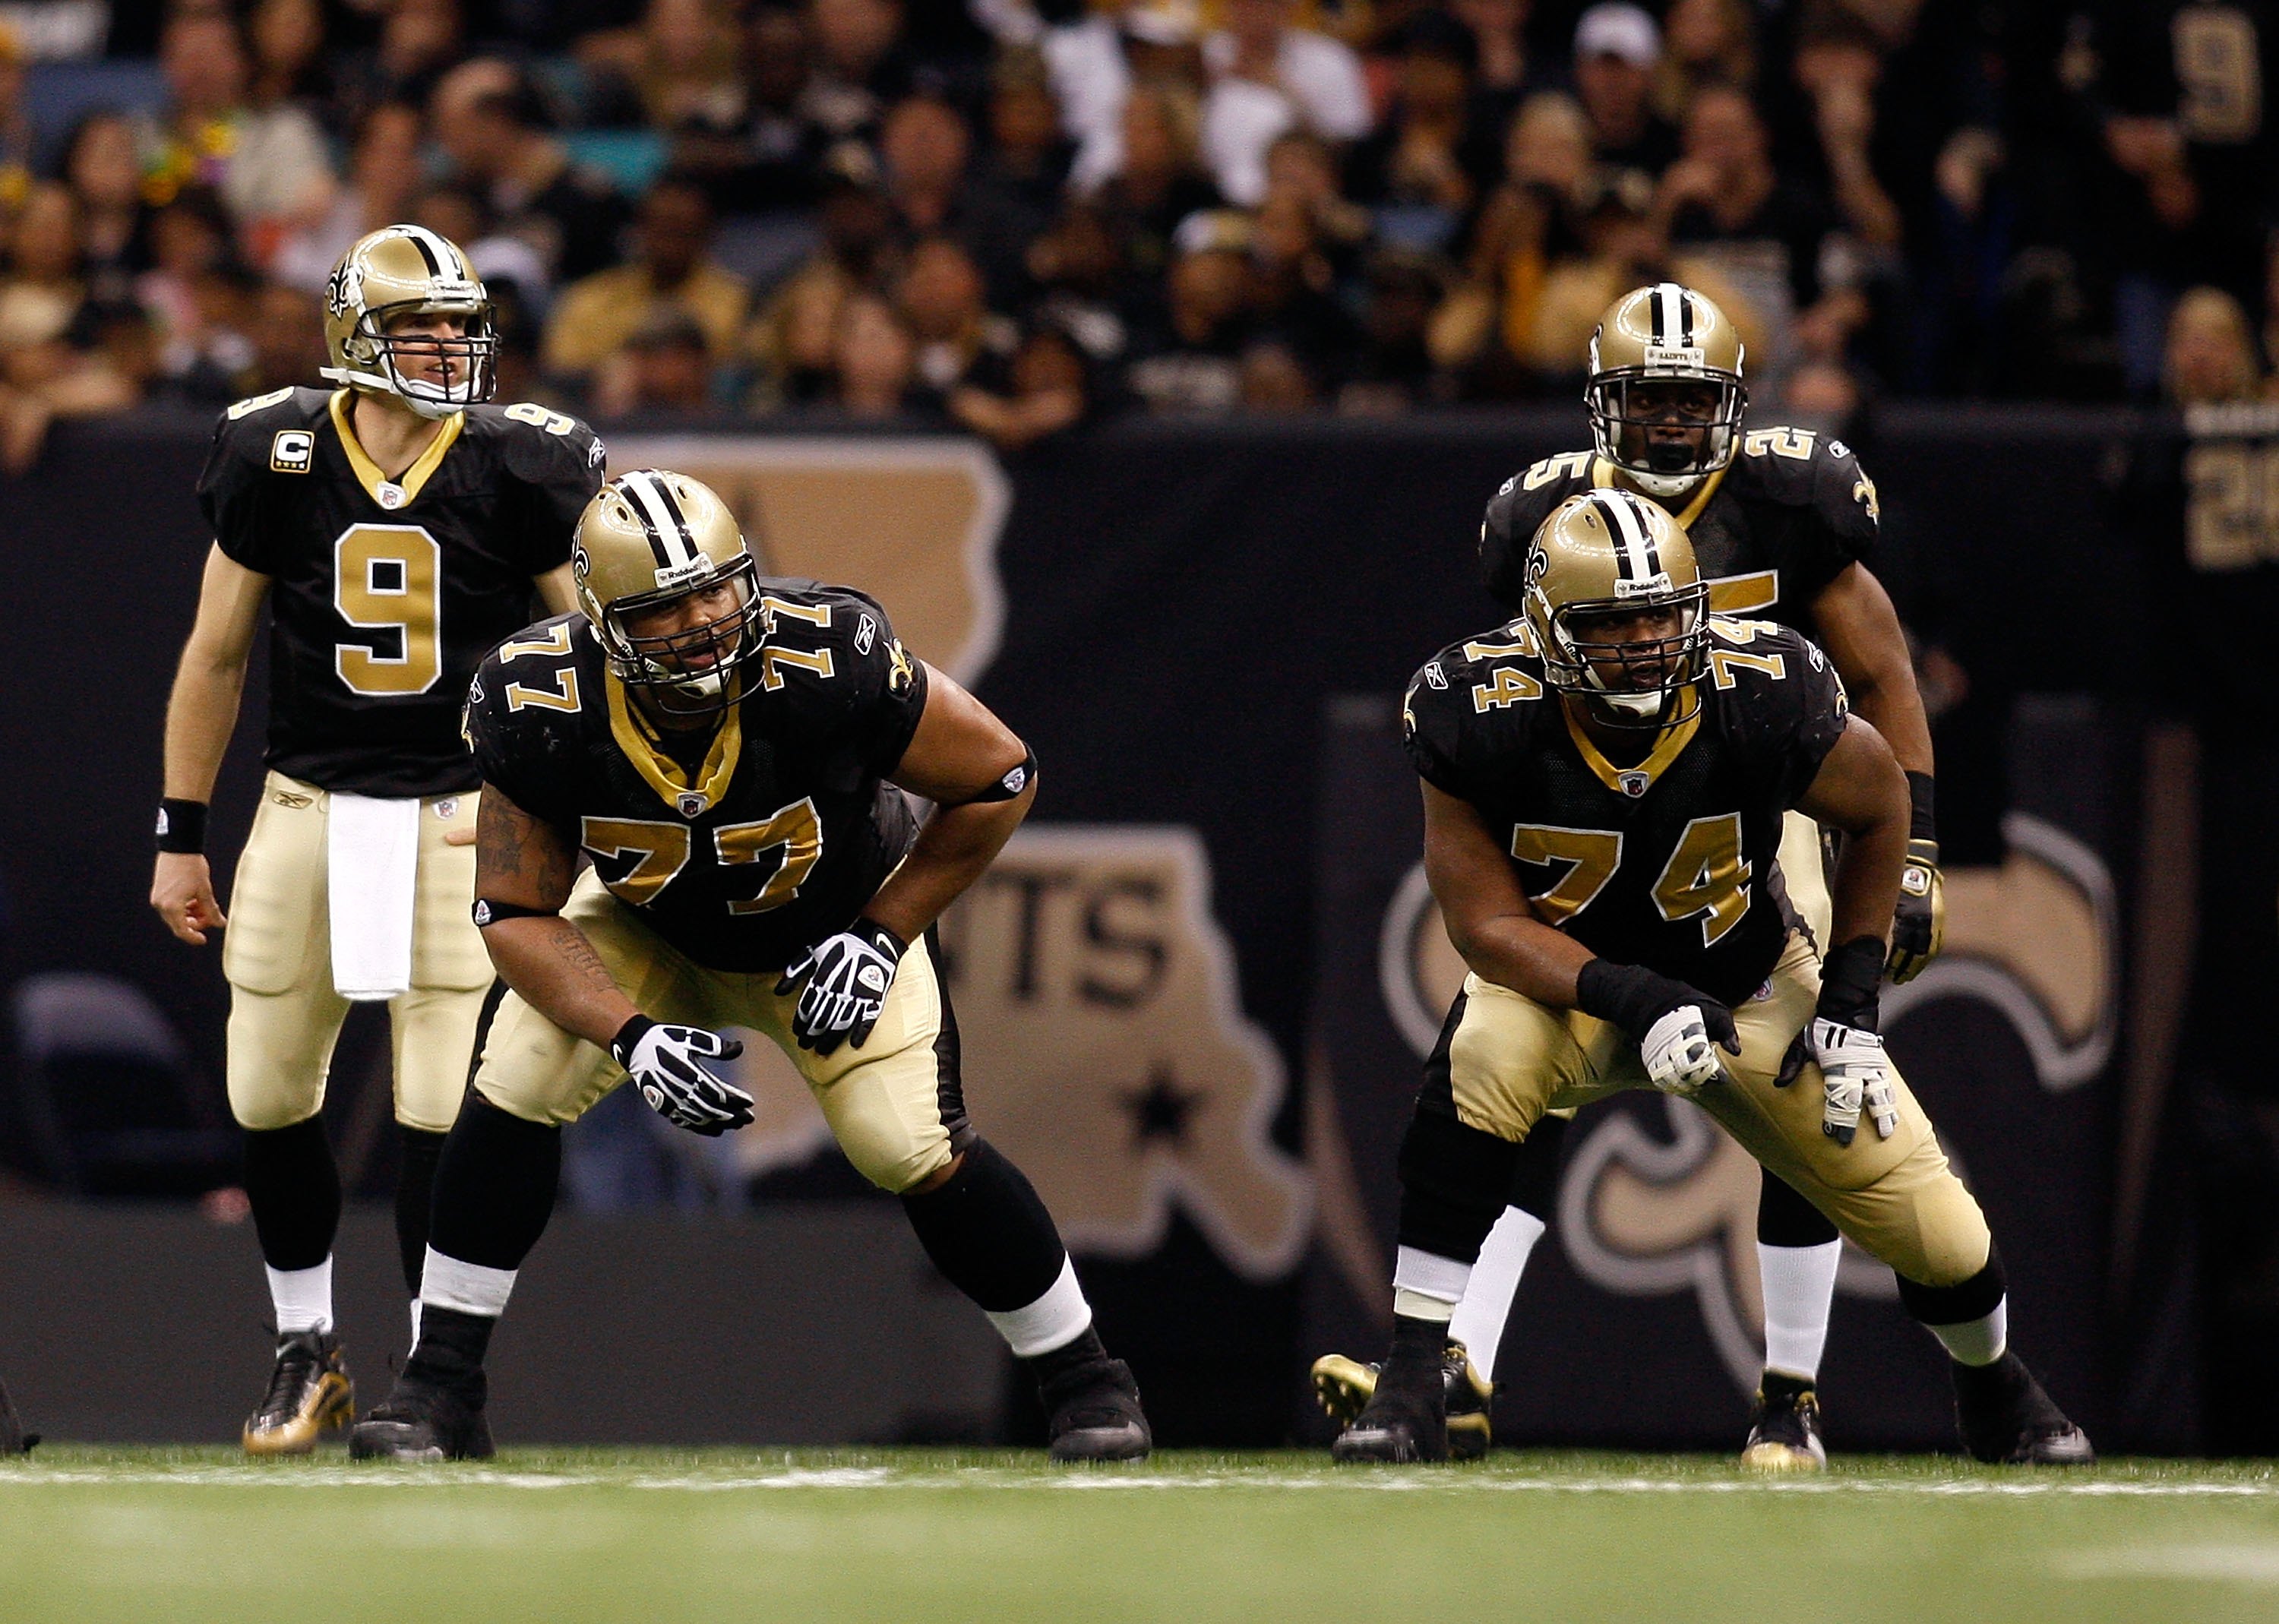 New Orleans Saints: A look at the team's 10-year challenge (2009-2019)